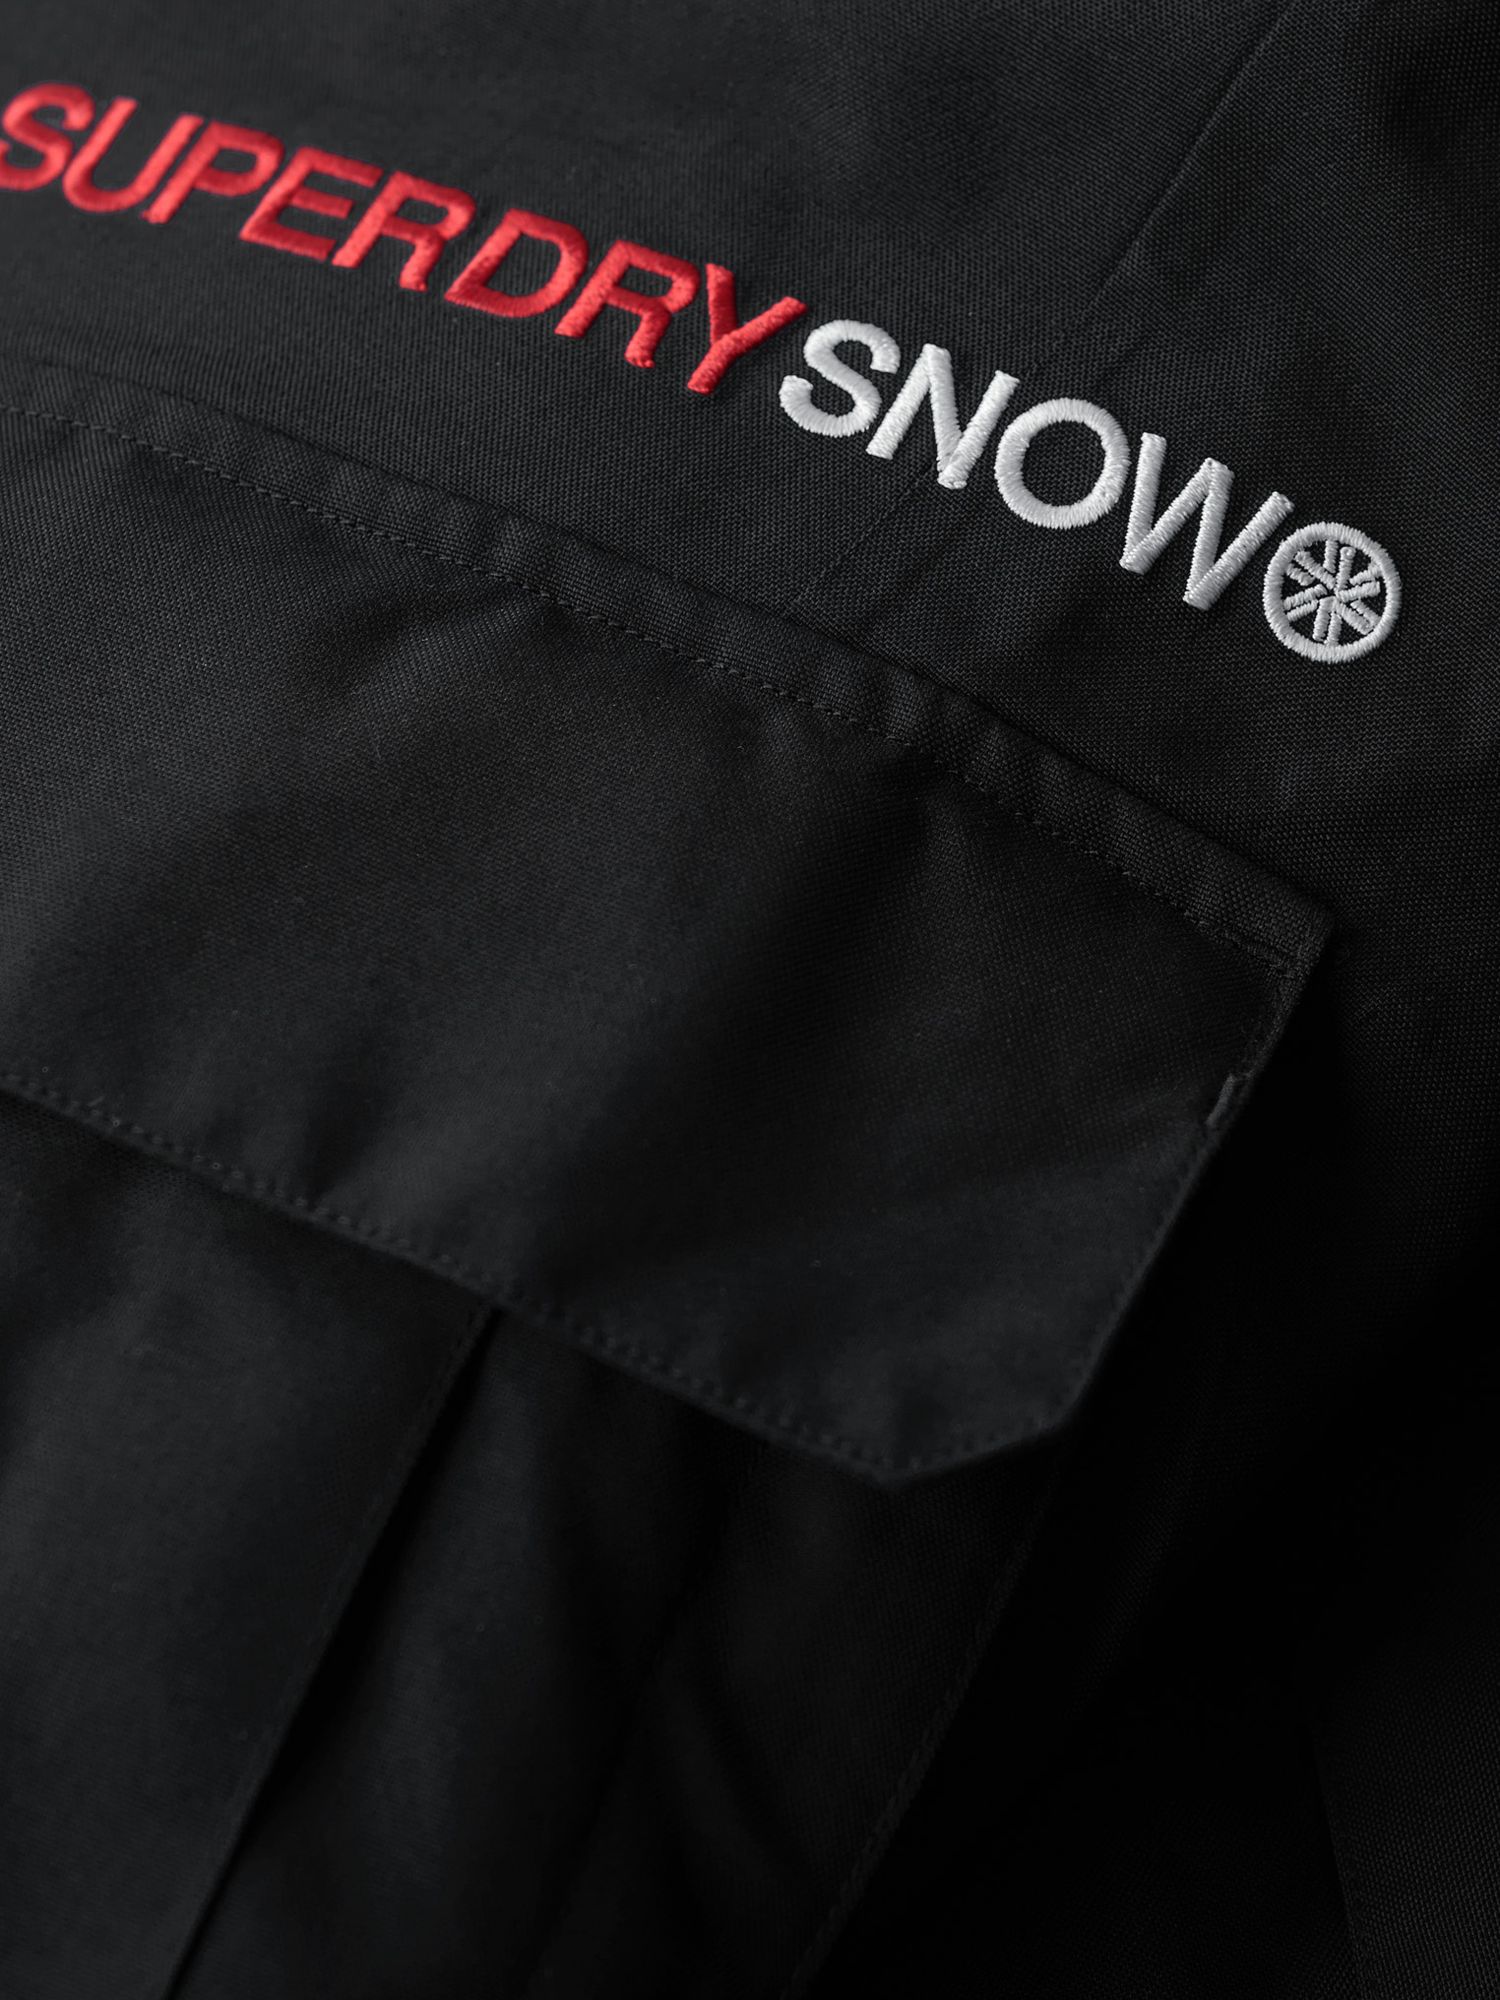 Buy Superdry Ski Ultimate Rescue Trousers Online at johnlewis.com